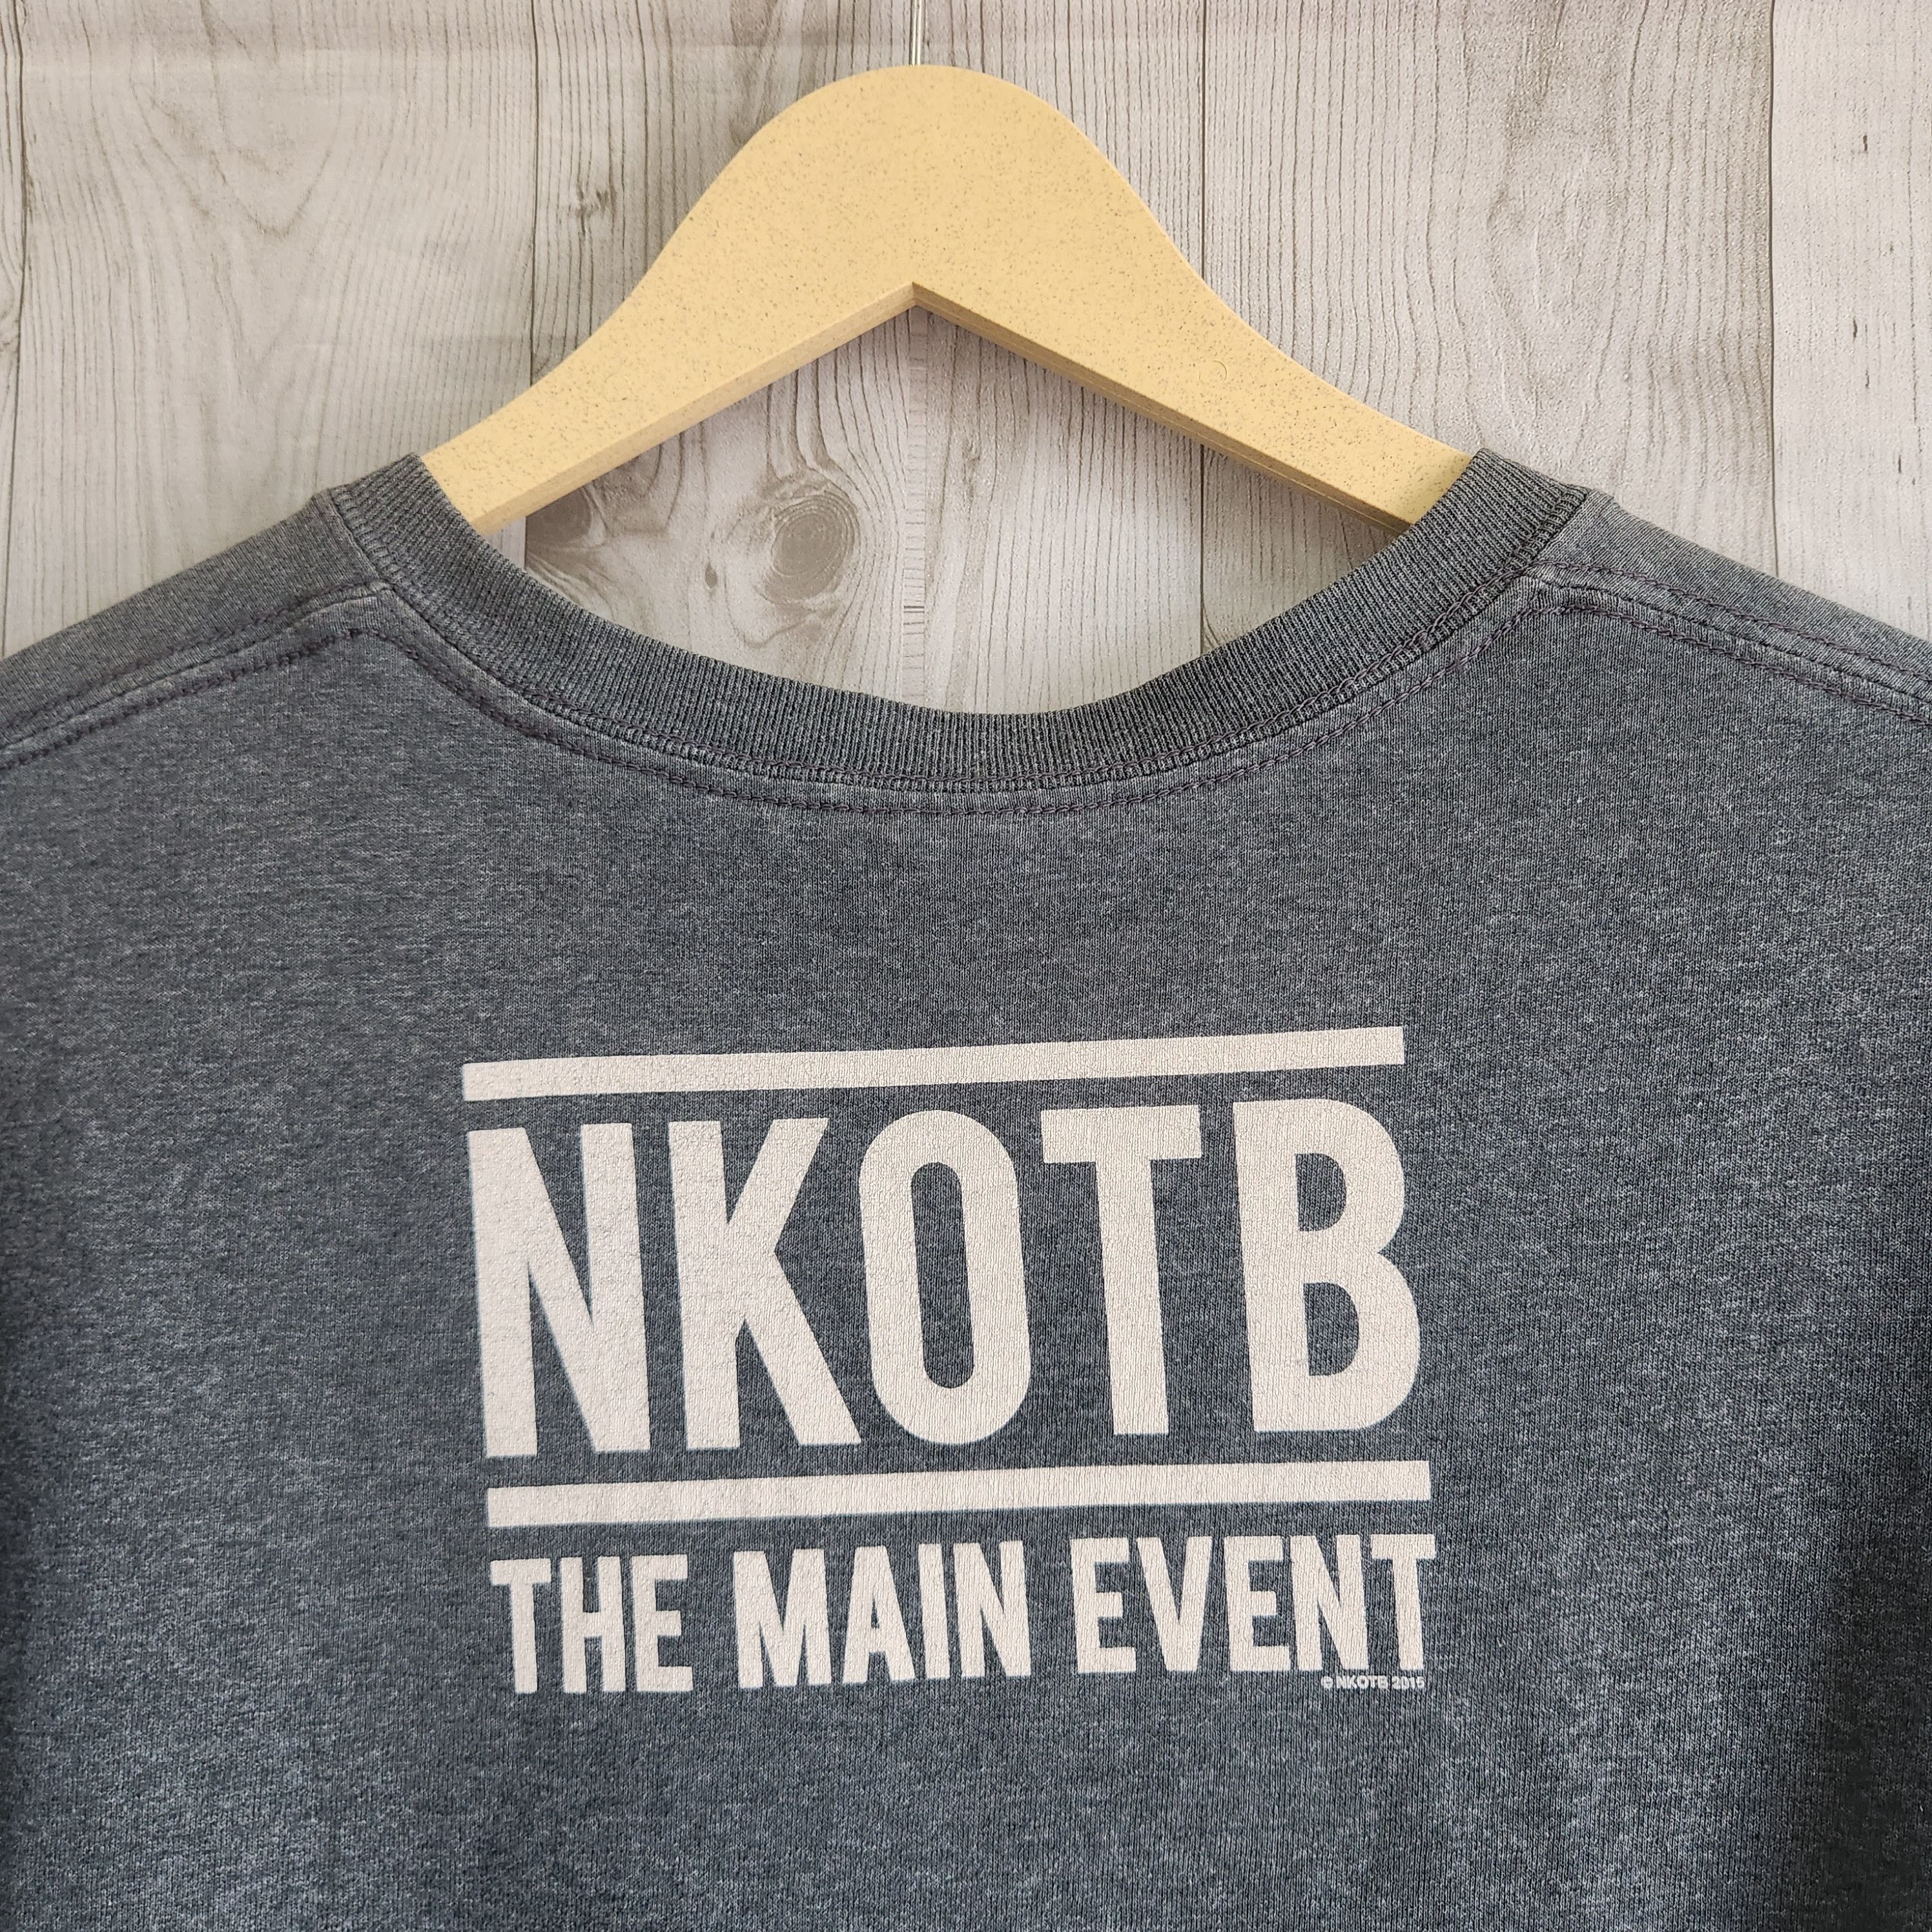 Band Tees - New Kids On The Block TShirt Copyright 2015 - 10